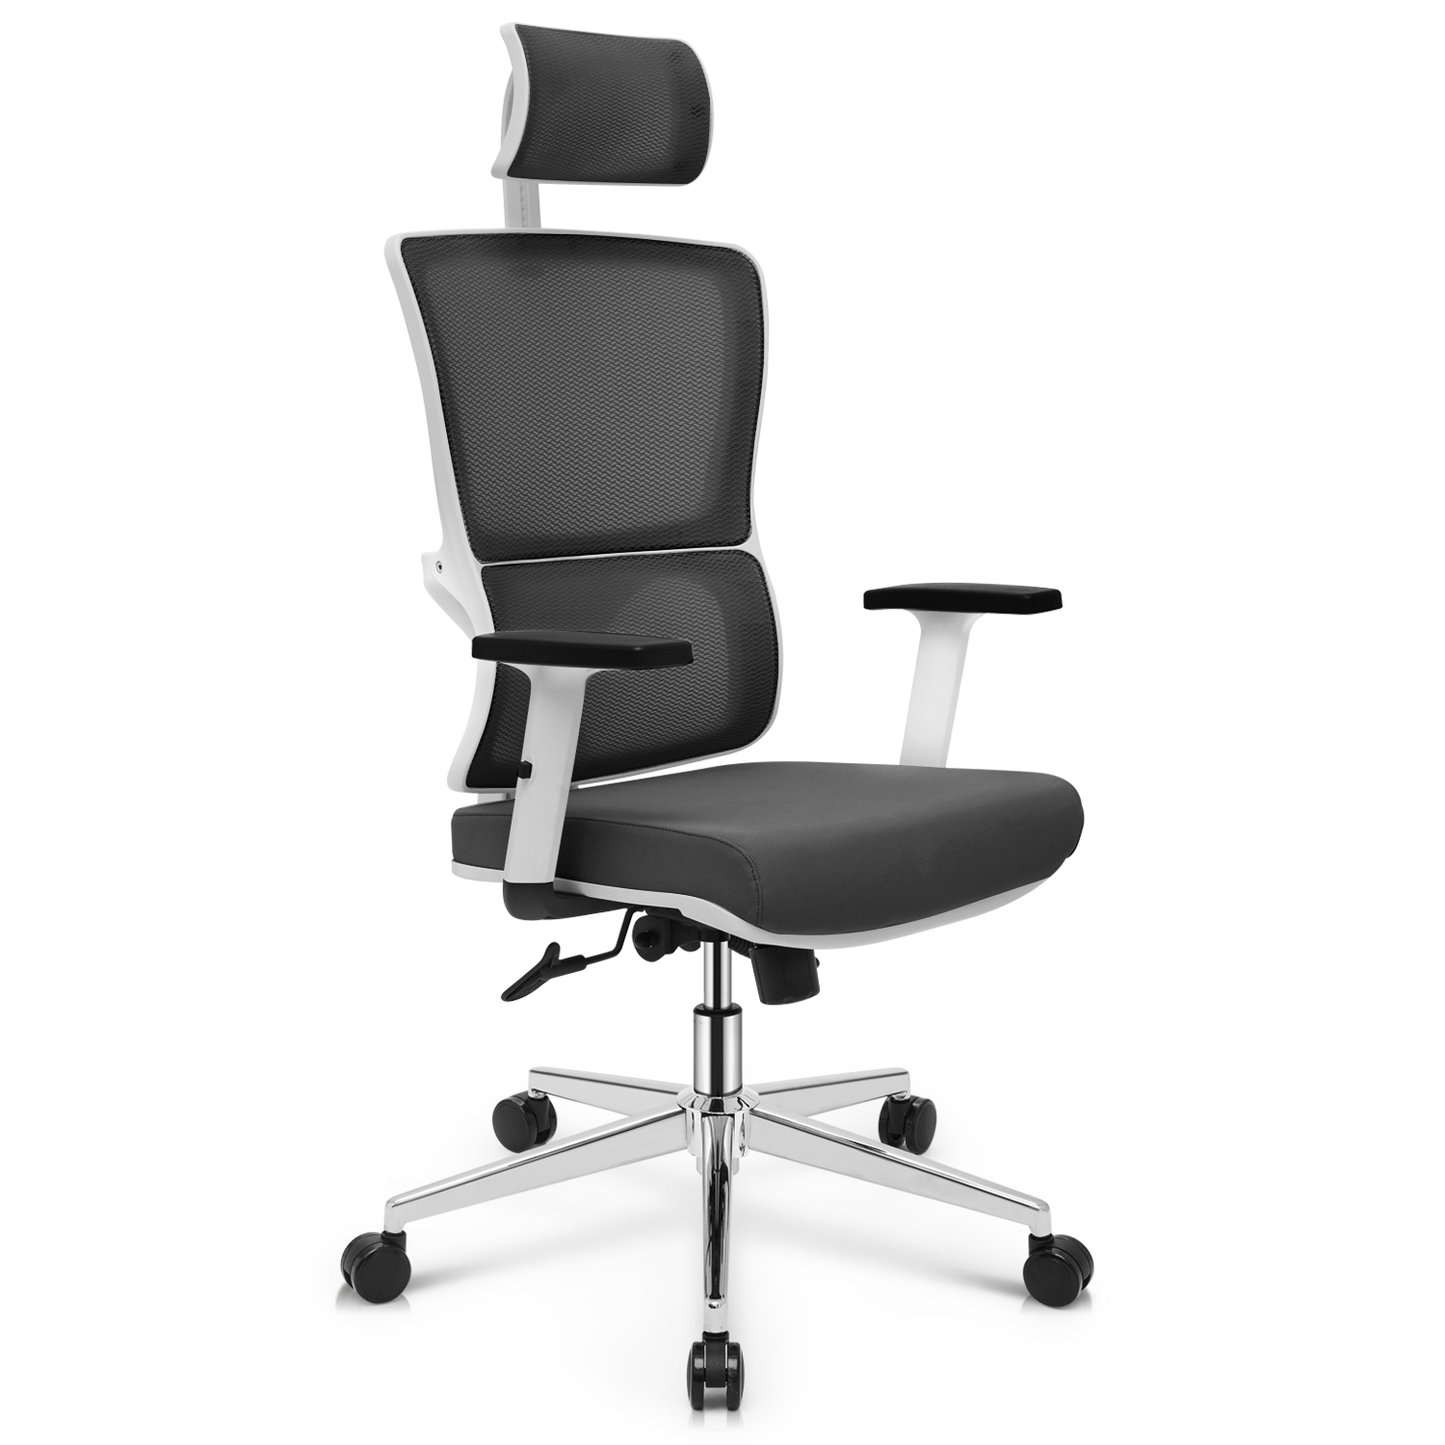 Office Chair w/Separated Seat Back